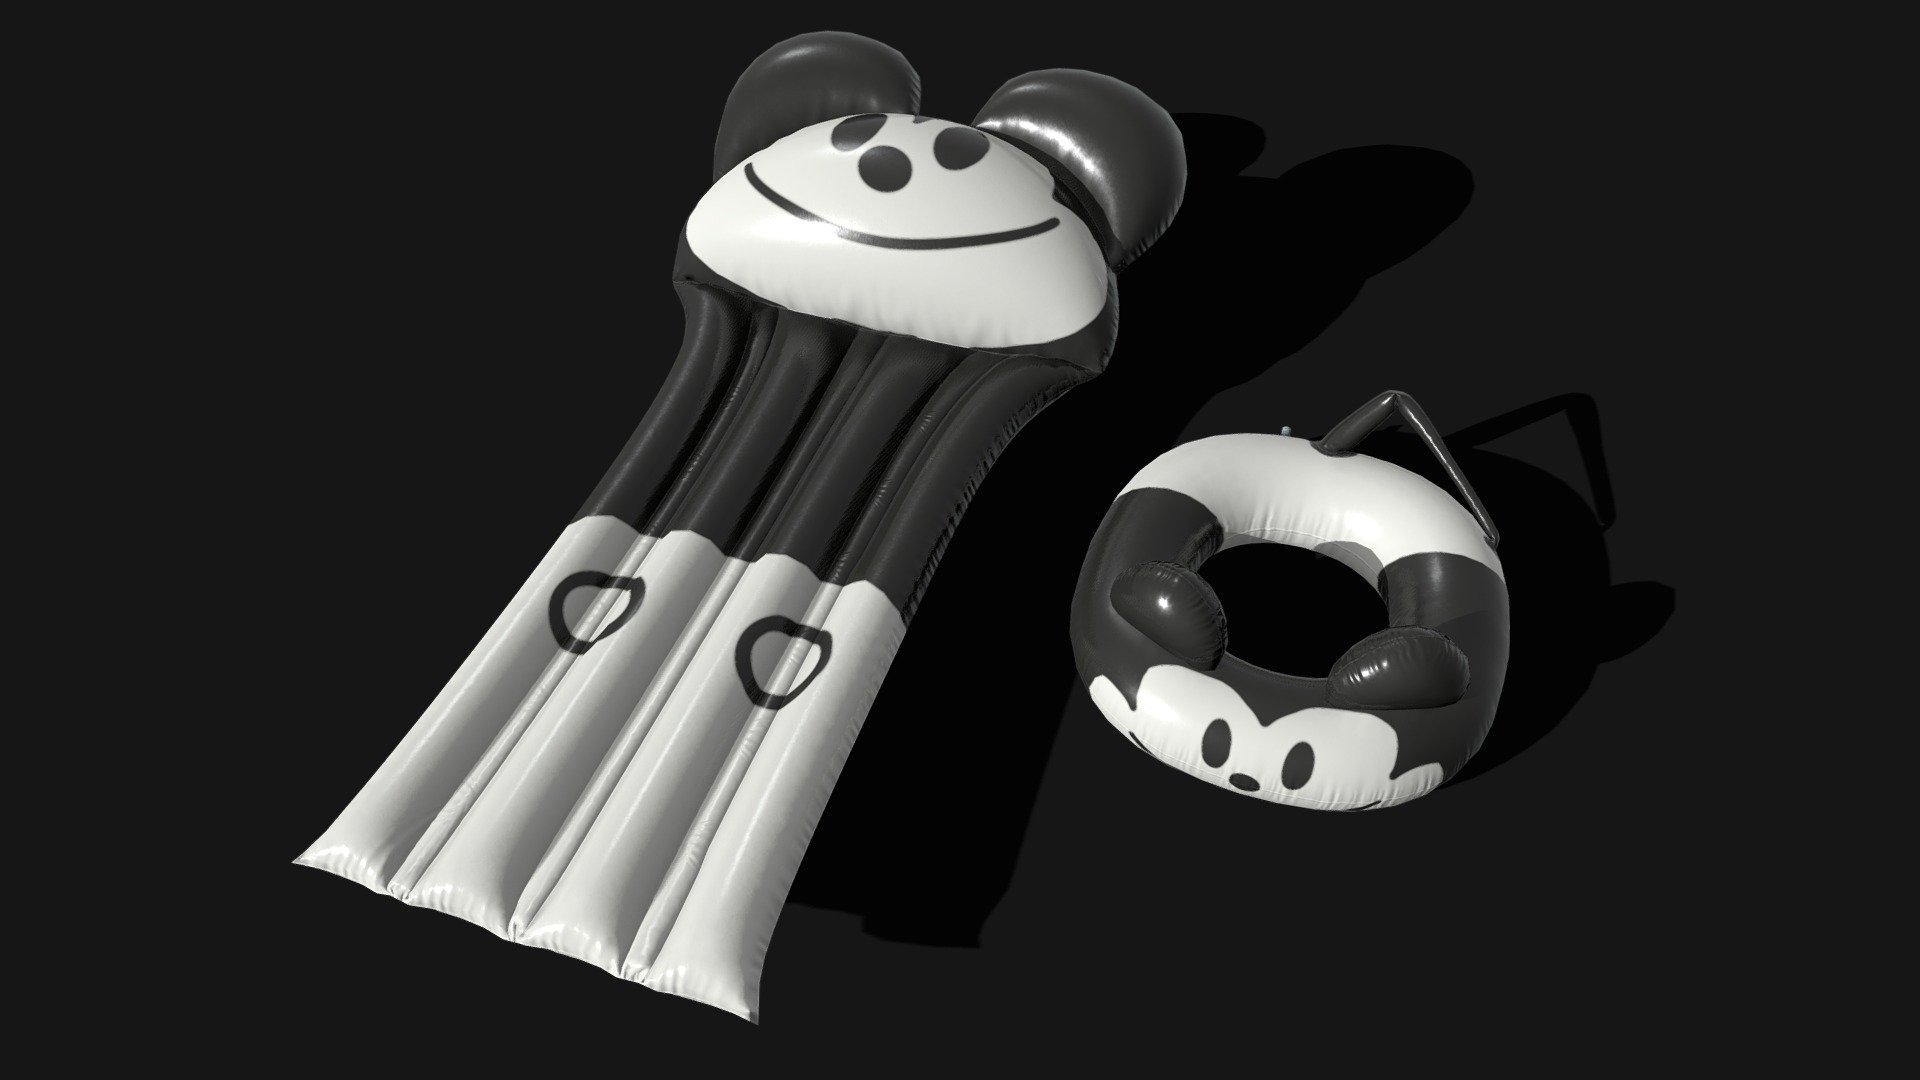 2k Mickey Pool Floats (Steamboat Willie)
PBR Validate.
Fully optimized for games or Archviz.
Include 2 different model, each model have 1 set of material, all made in Substance Painter.
Float 1 size: 79cm X 37cm X 86cm
Float 2 size: 1.11m X 47cm X 2.16m

Float1= 3.262 Tri.
Float2= 5.360 Tri.

No moving parts.
Formats are: Fbx, Collada, Obj, Gltf.
10 Textures, size of 2048x2048.
2 - Base Color PNG 16bit.
2 - Metallic PNG 8bit.
2 - Roughness PNG 8bit.
2 - Normal PNG 16bit OpenGL.
2 - Normal PNG 16bit DirectX 3d model